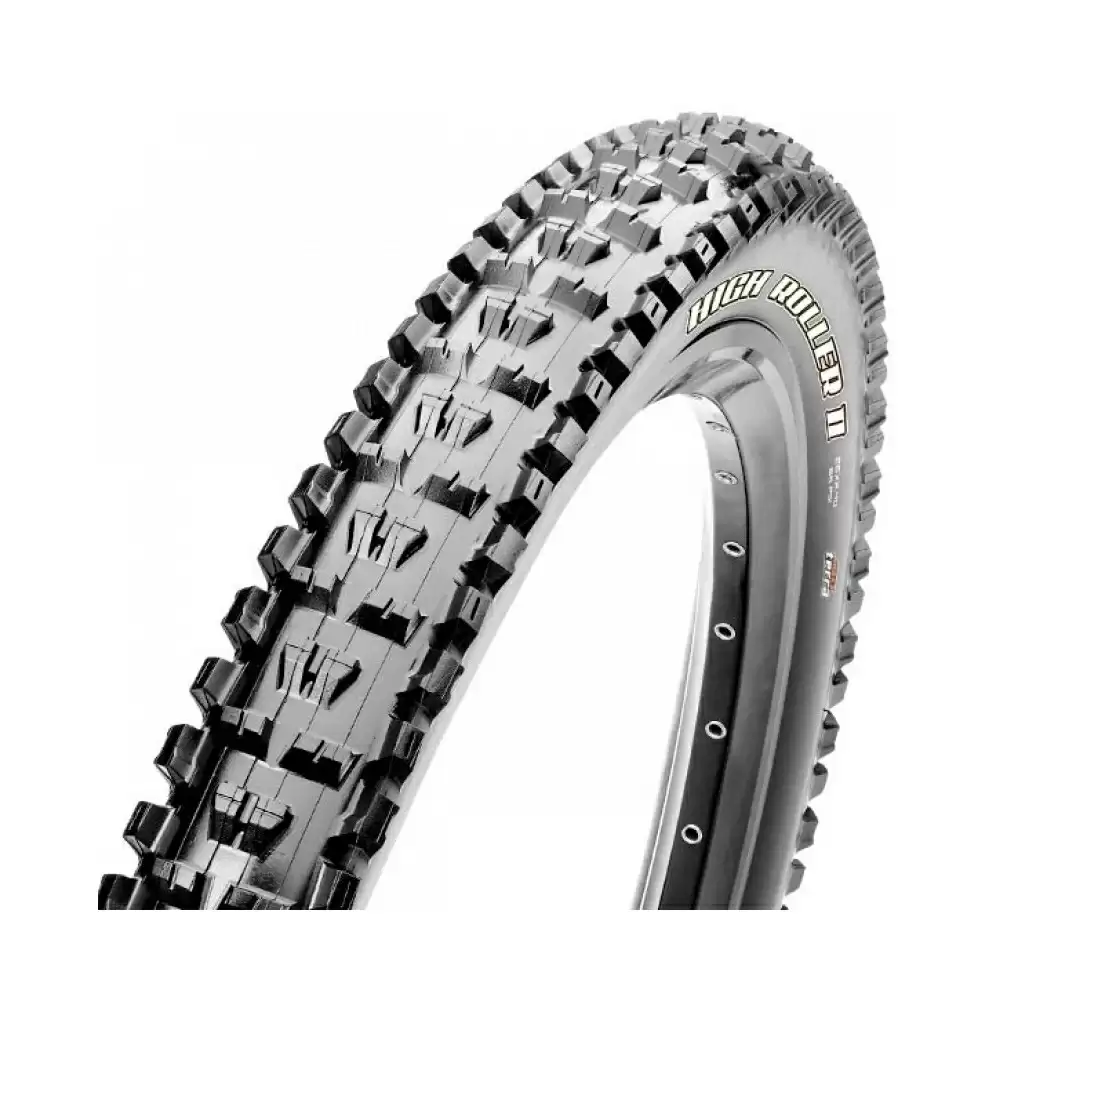 Tire High Roller II Exo Tr 27.5x2.80'' Dual 60TPI Tubeless Ready Black - image